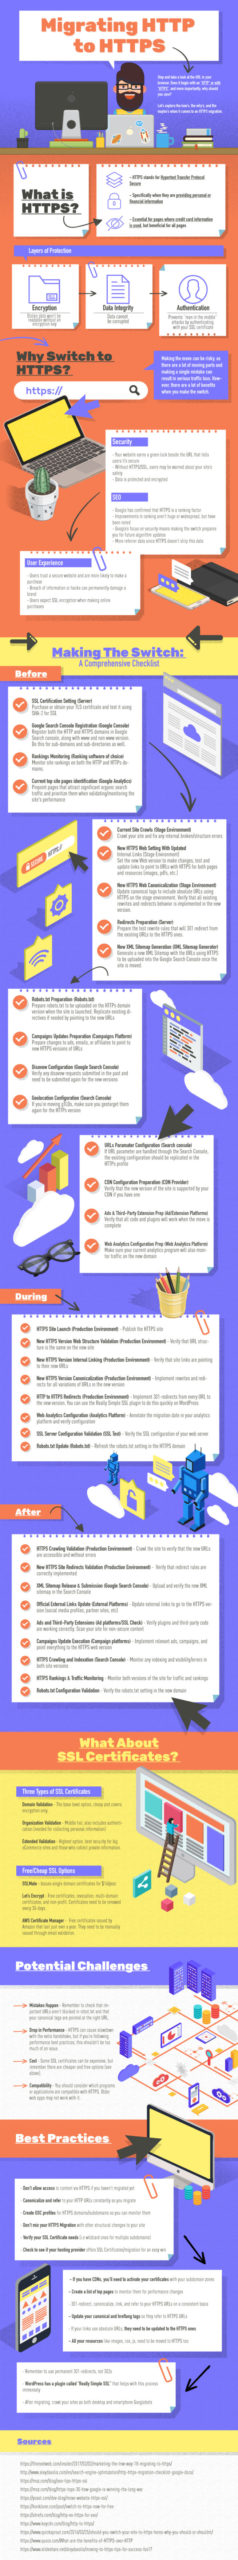 Migrating HTTP to HTTPS [Infographic]